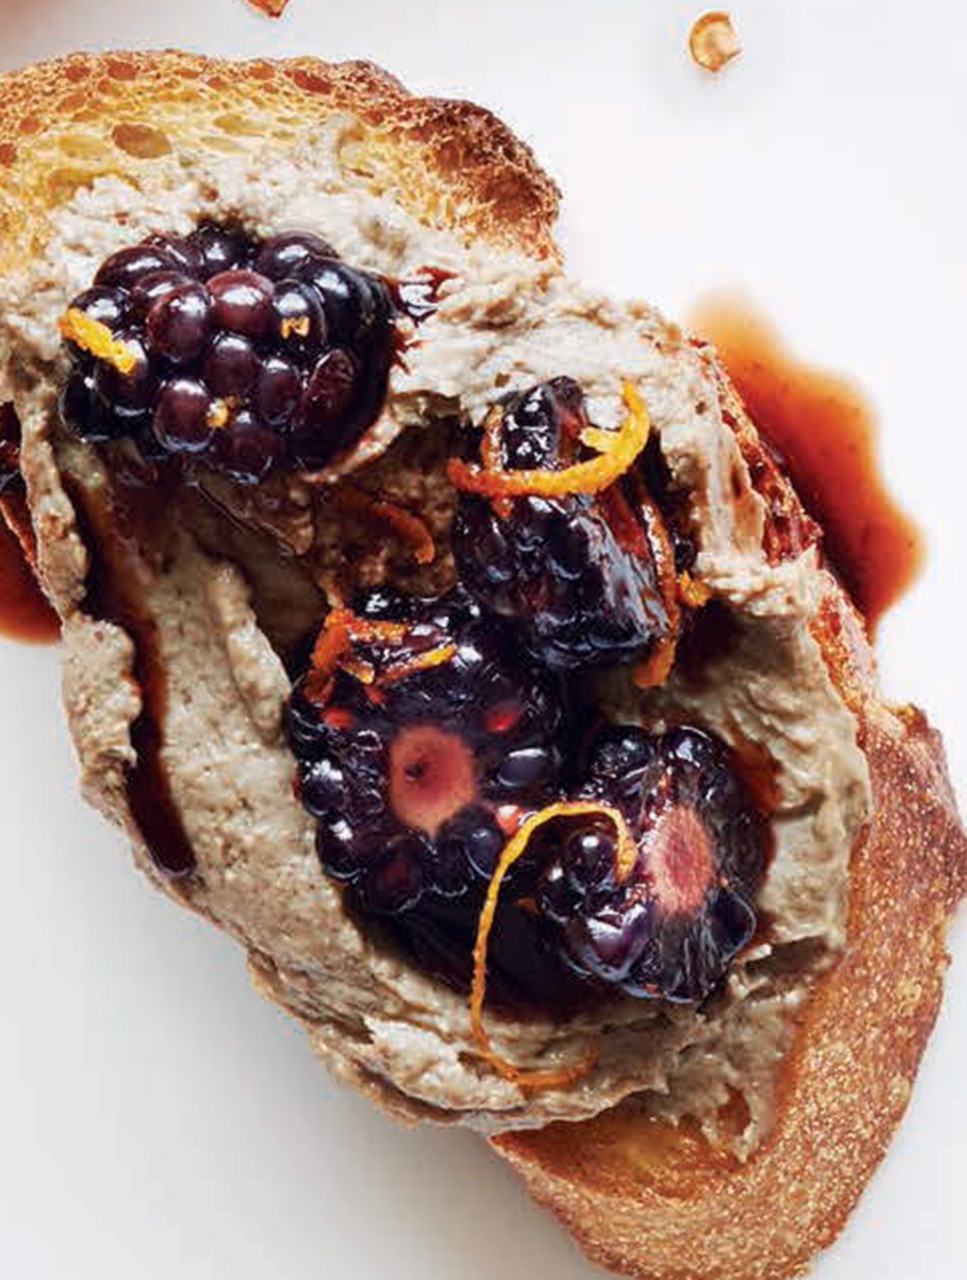 Chicken Liver Mousse Crostini with Marinated Blackberries